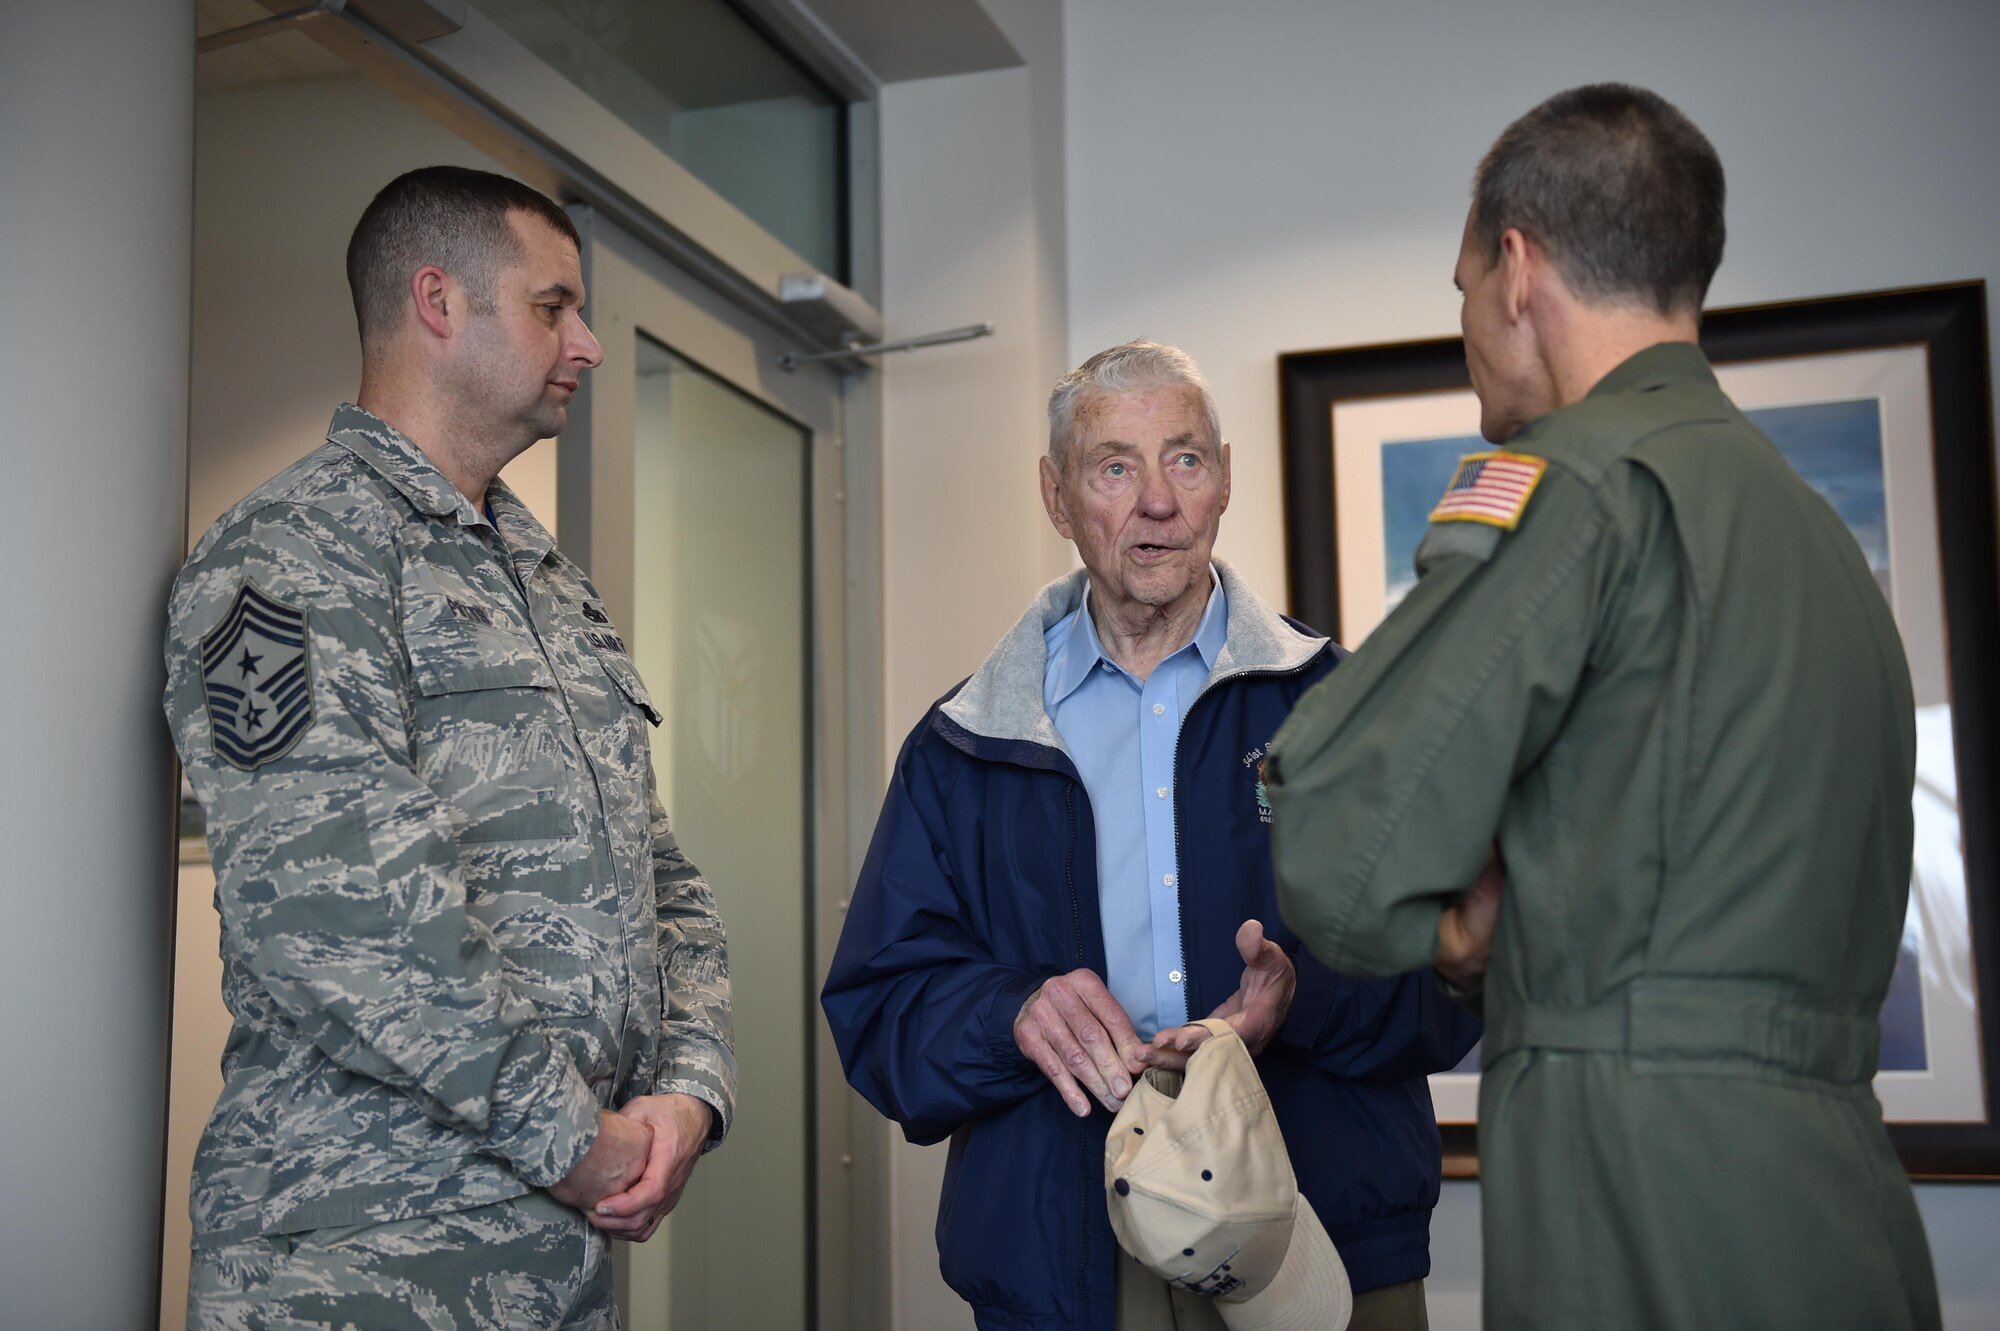 910th Airlift Wing Command Chief Master Sgt. Bob Potts (left) introduces retired Chief Master Sergeant of the Air Force Robert Gaylor (center) to 910th Airlift Wing Commander Col. Dan Sarachene here, March 3, 2017. Gaylor visited Youngstown Air Reserve Station to speak at an enlisted leadership workshop and serve as the guest speaker at the Annual Awards Banquet held here March, 4.(U.S. Air Force photo/Eric White)